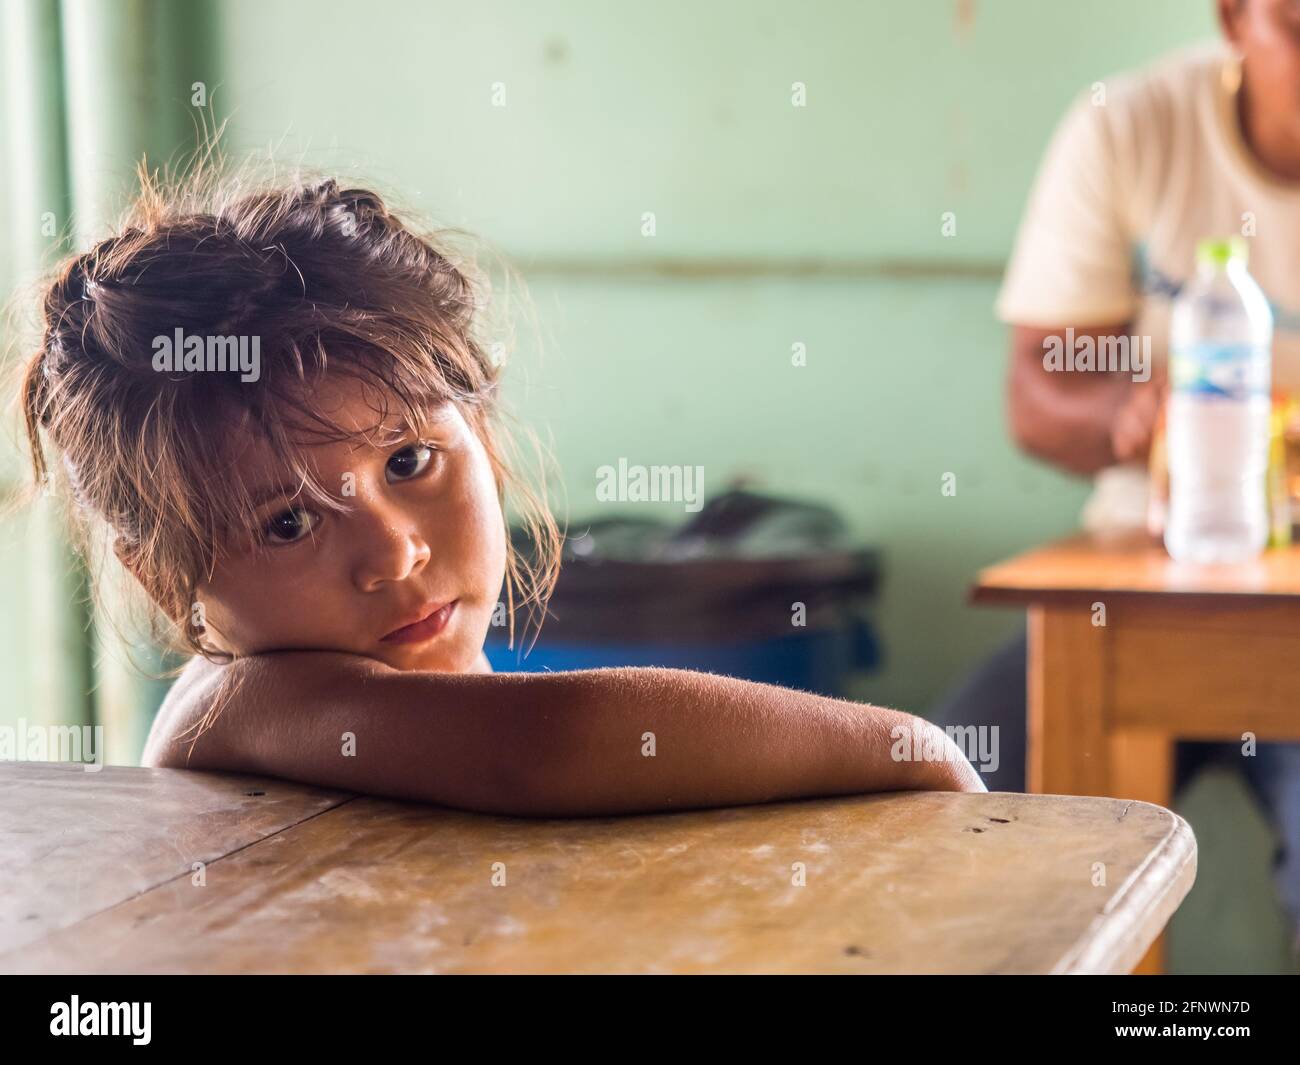 Amazon River, Peru - Sep 20, 2017: Portrait of a small girl – an inhabitant of the Peru. Amazonia, South America. Stock Photo